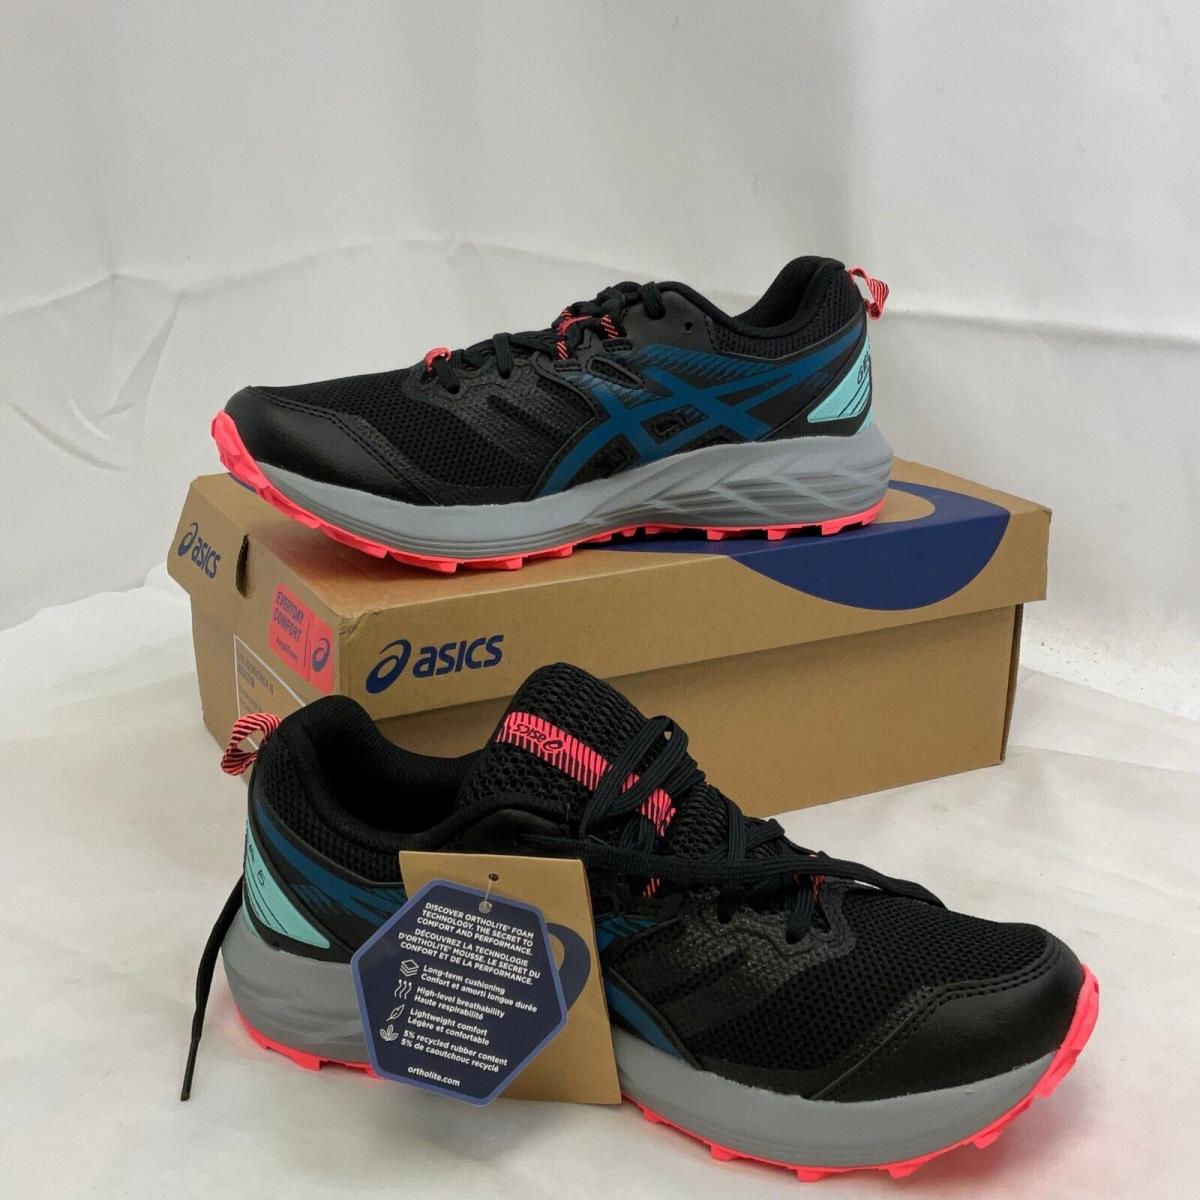 Asics Gel-sonoma 6 1012A922 Womens Multicolor Lace Up Sneaker Shoes Size 8.5